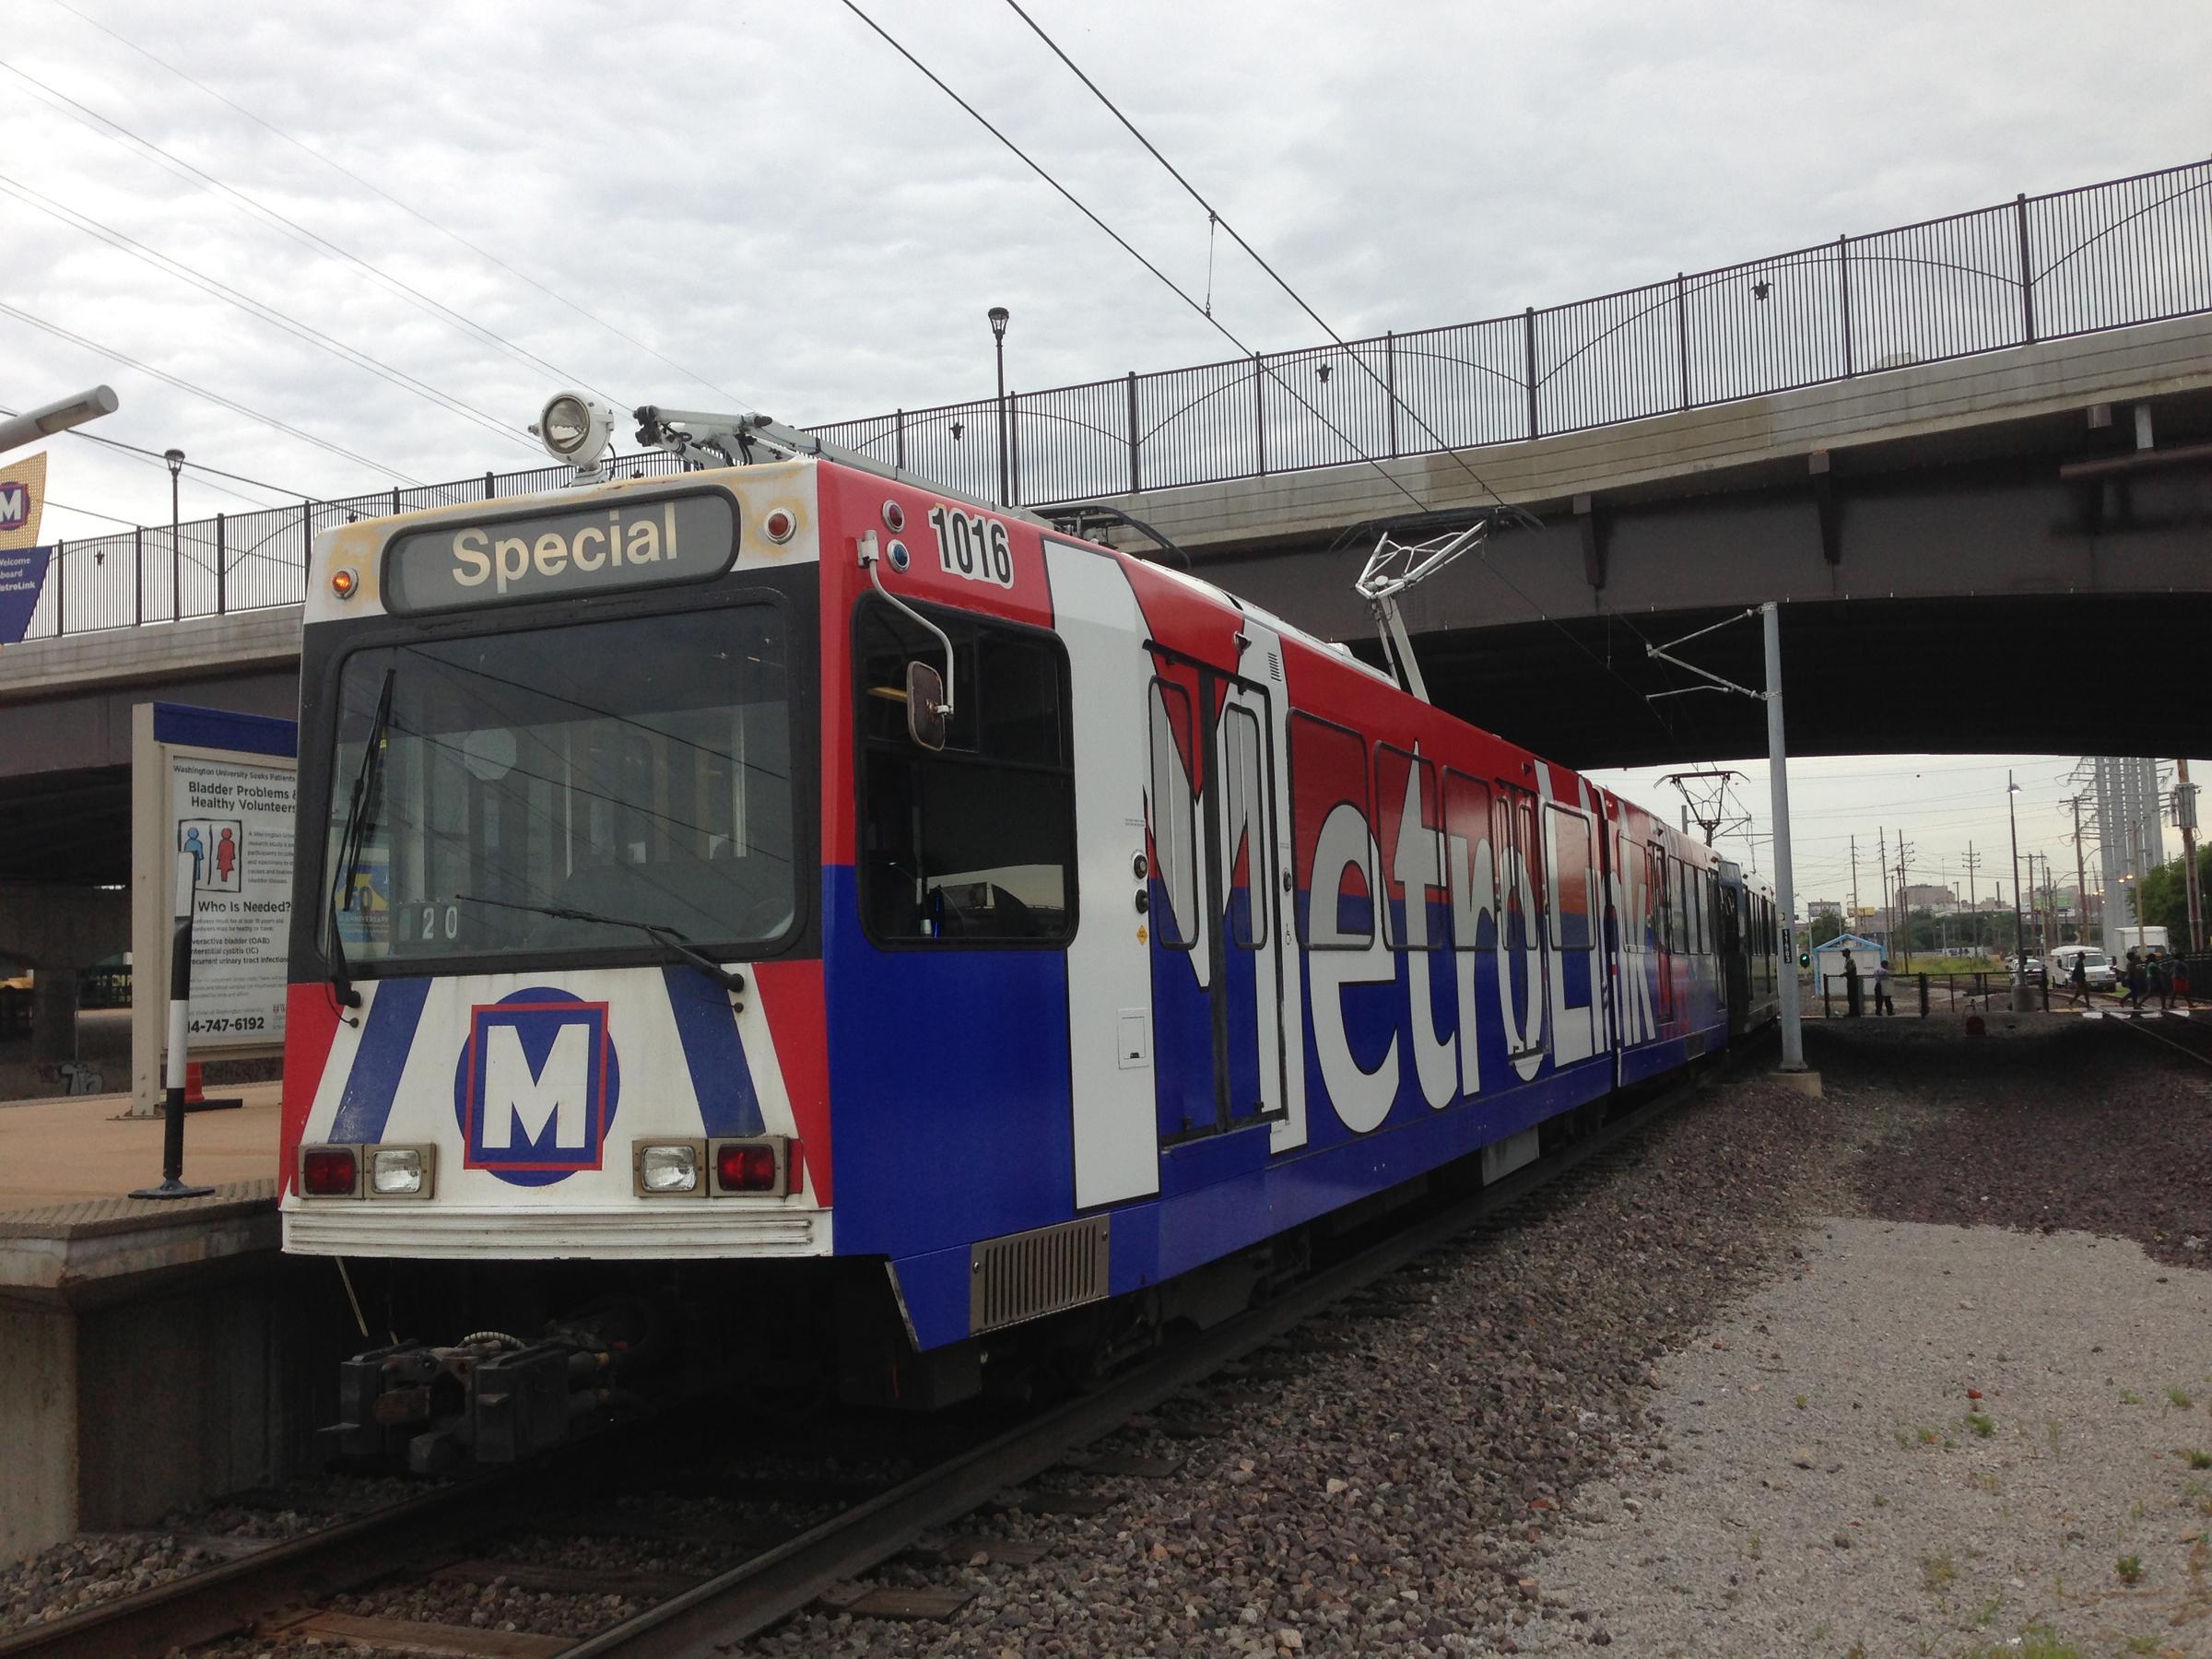 Audits to examine broader community role for MetroLink stations | St. Louis Public Radio